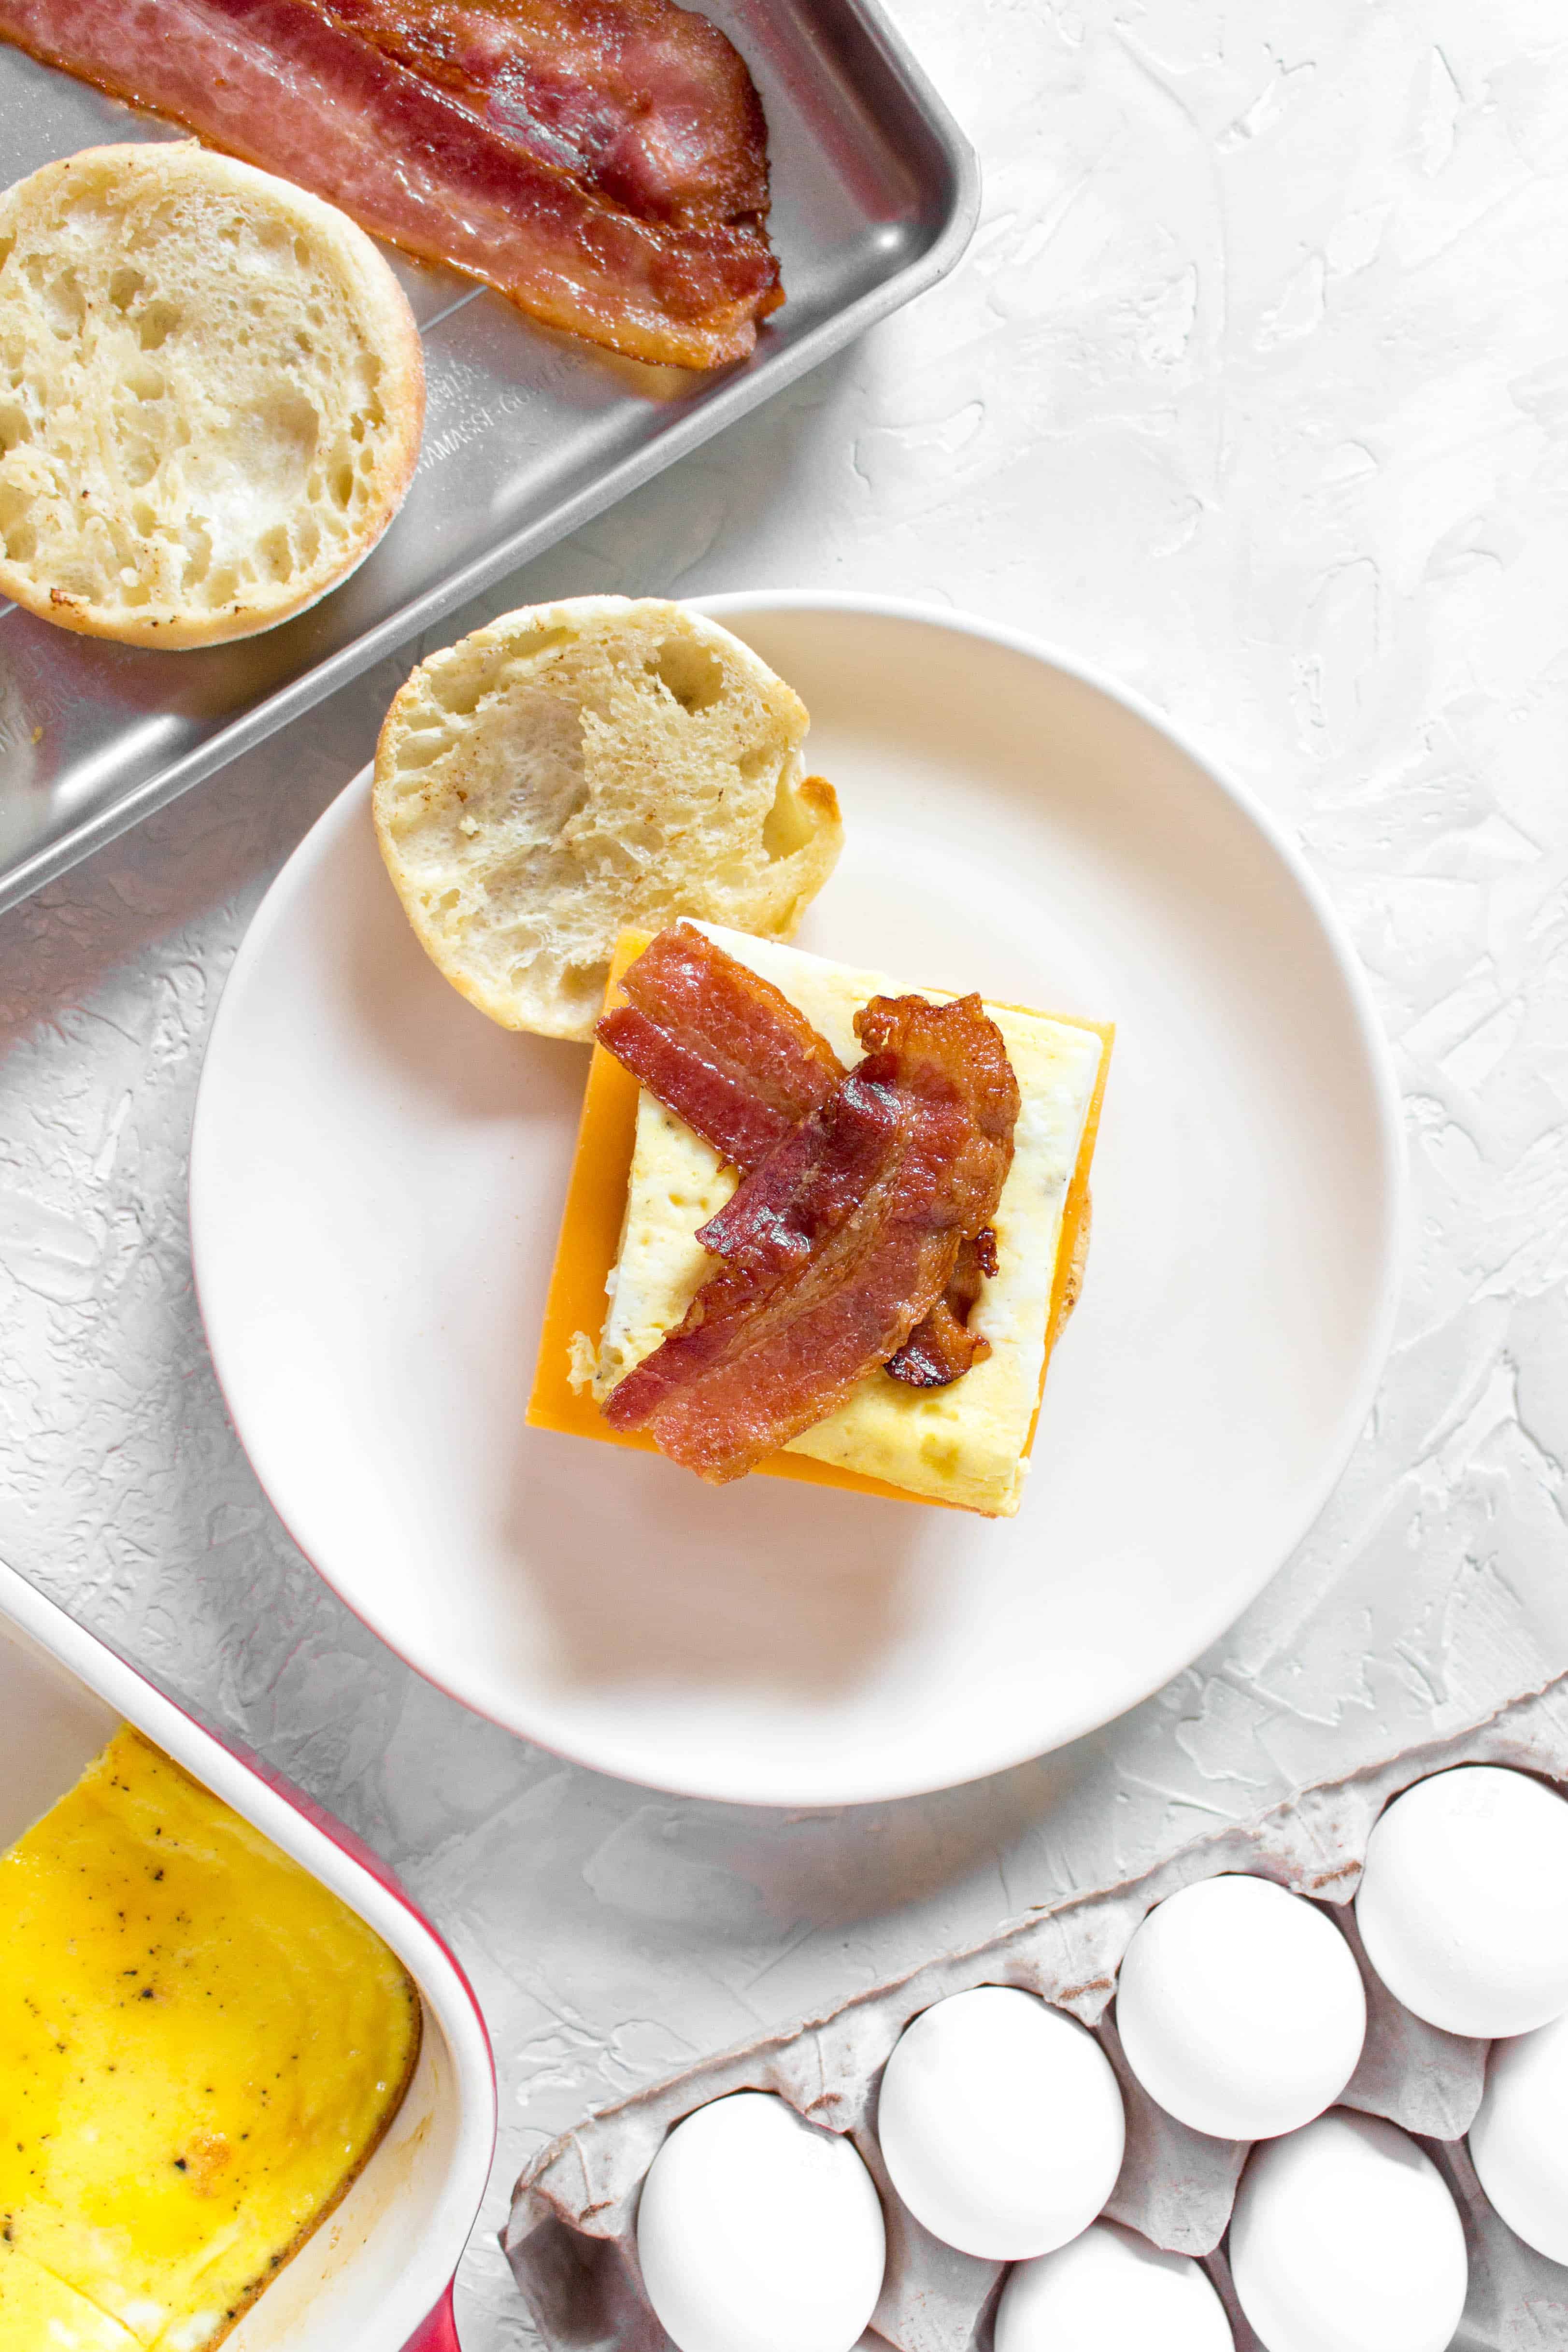 Skip the drive thru in the morning and make your own freezer friendly breakfast egg sandwiches. Make a batch, freeze it, and have a sandwich for breakfast everyday!